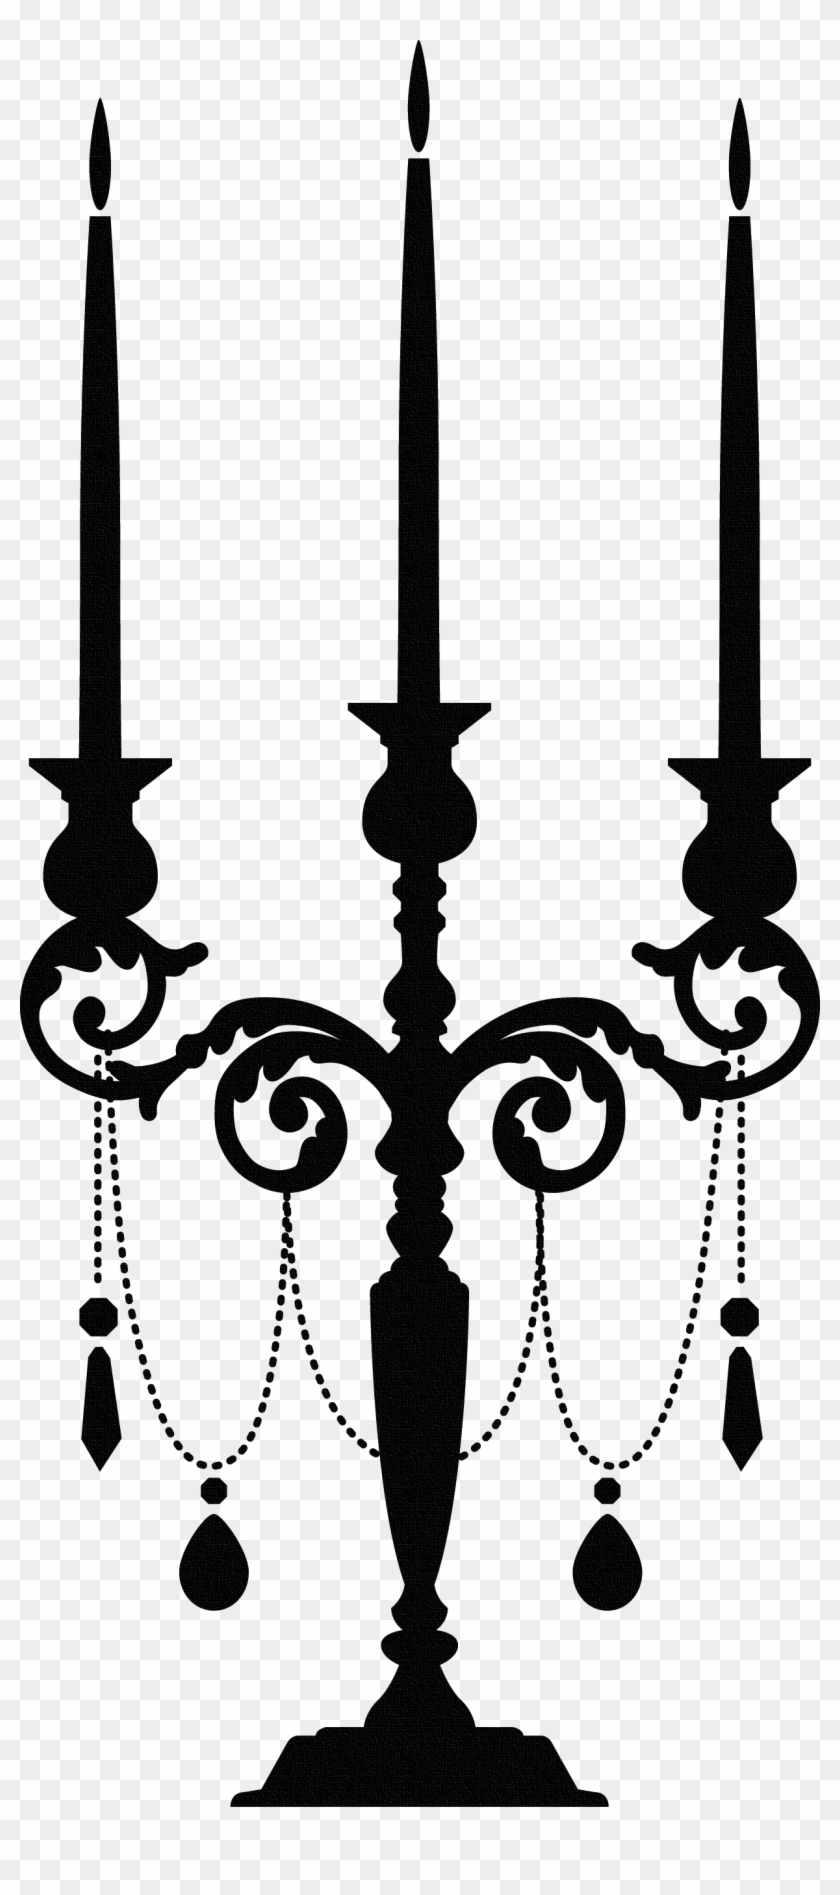 Clipart Png Coleccion Glamour - Candelabra Silhouette #649762